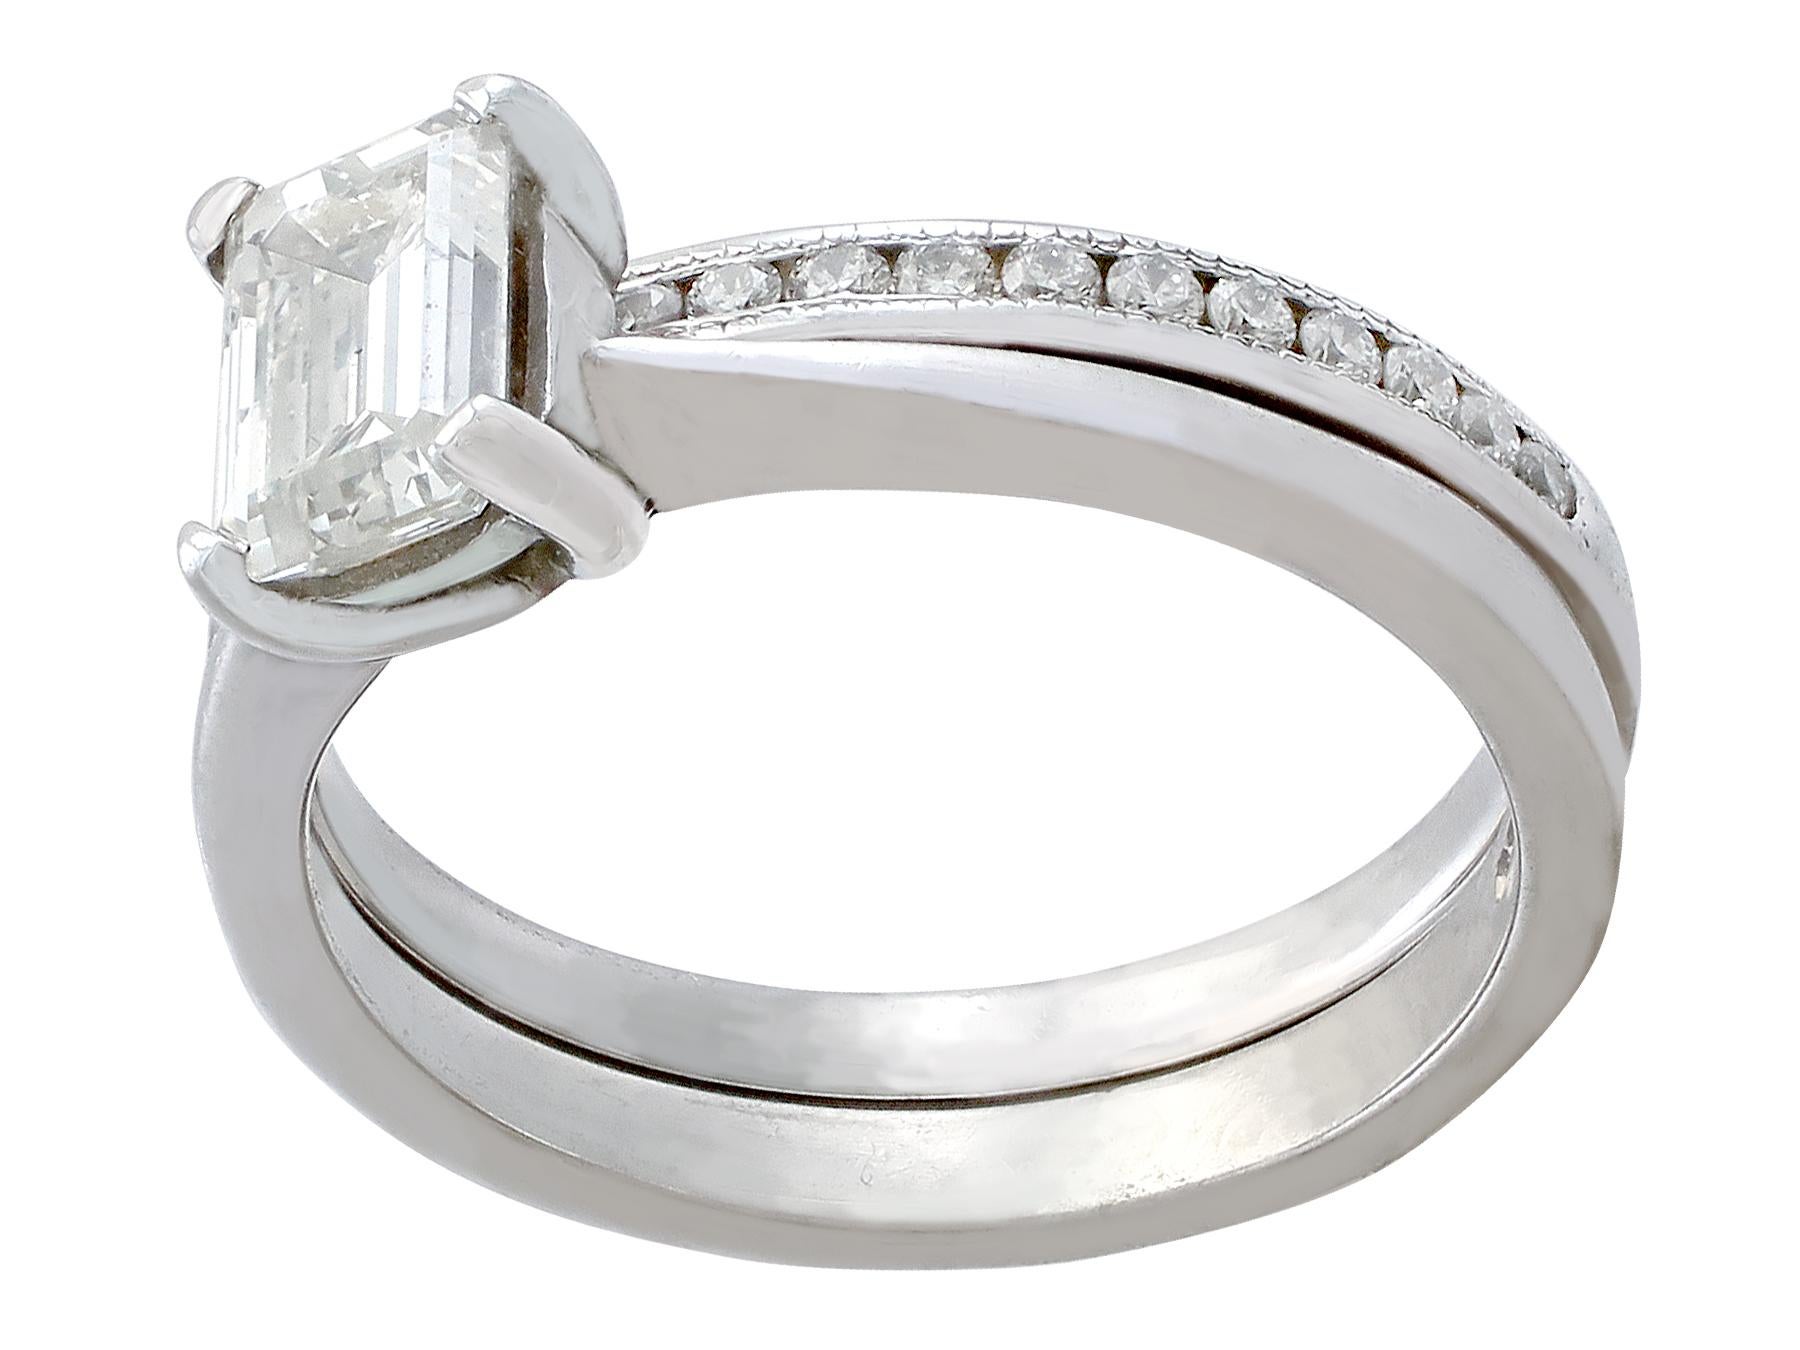 Women's or Men's 1.02 Carat Diamond and Platinum Solitaire and Half-Eternity Ring